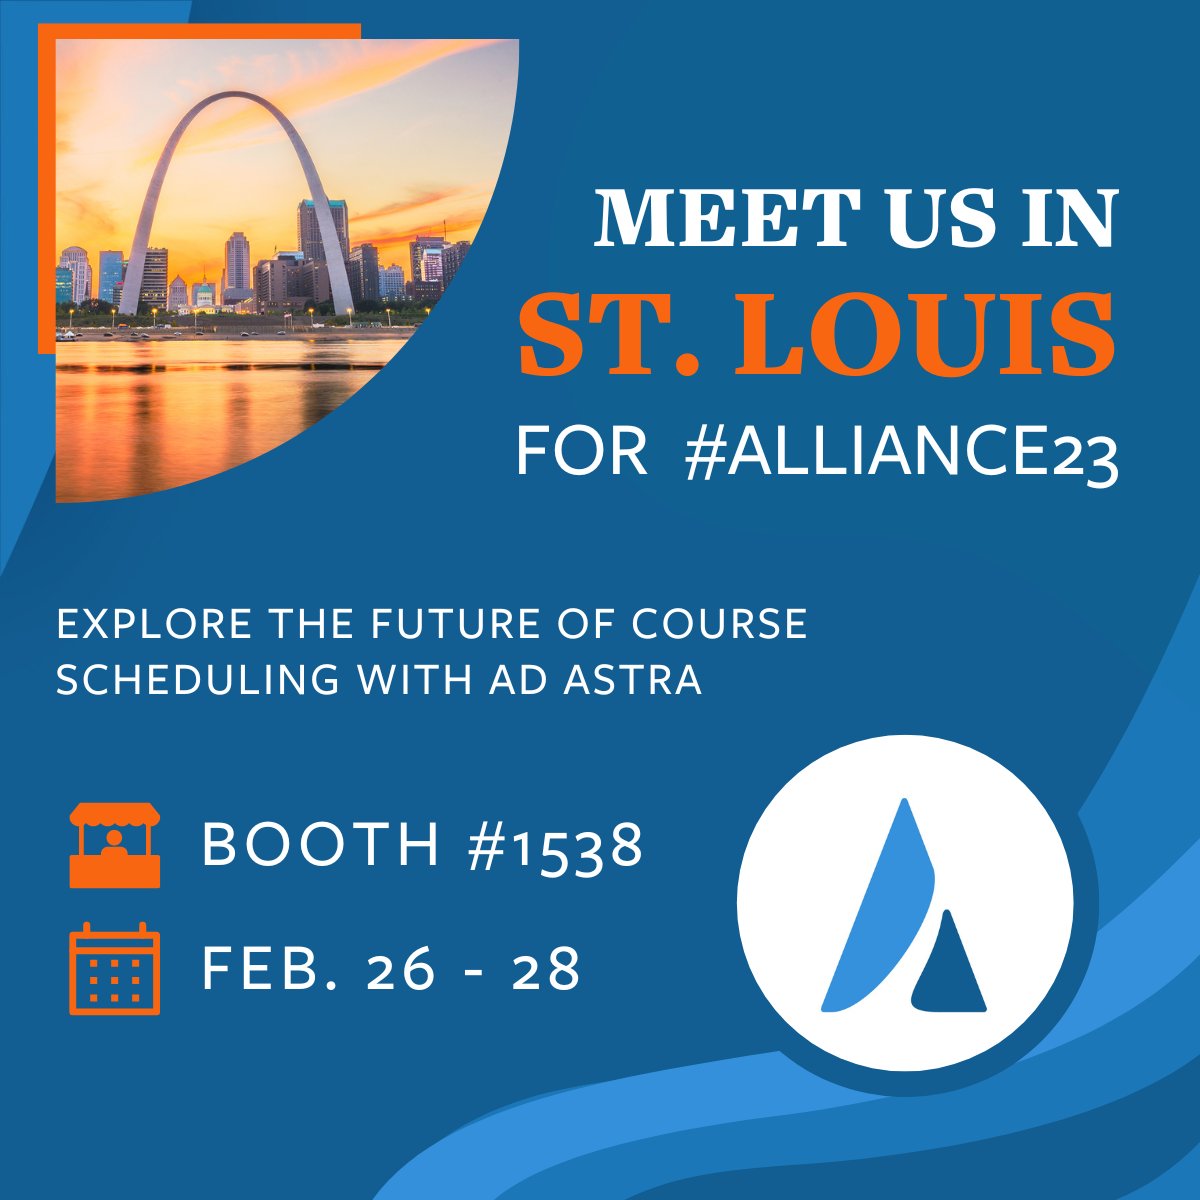 It's almost time for @heug's #Alliance23 in St. Louis! Swing by Booth 1538 to explore how you can leverage course scheduling as a data-driven tool to accelerate completions, improve financial health, and achieve equitable outcomes at your institution. We'll see you there! ✈️